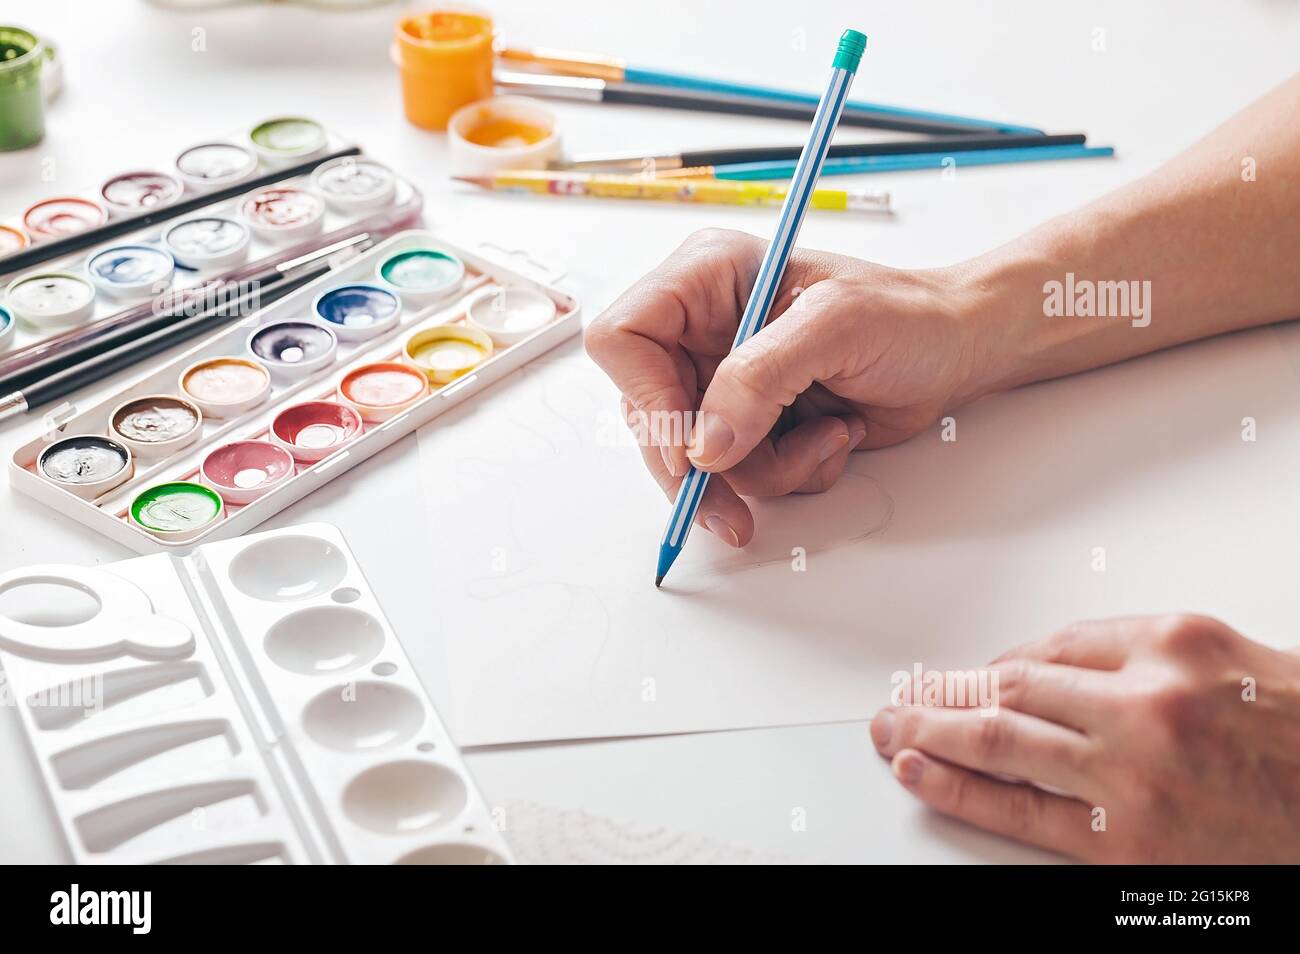 Graceful female hands sketching on a blank sheet of paper. Hands in the frame close-up. Hobbies concept. Stock Photo